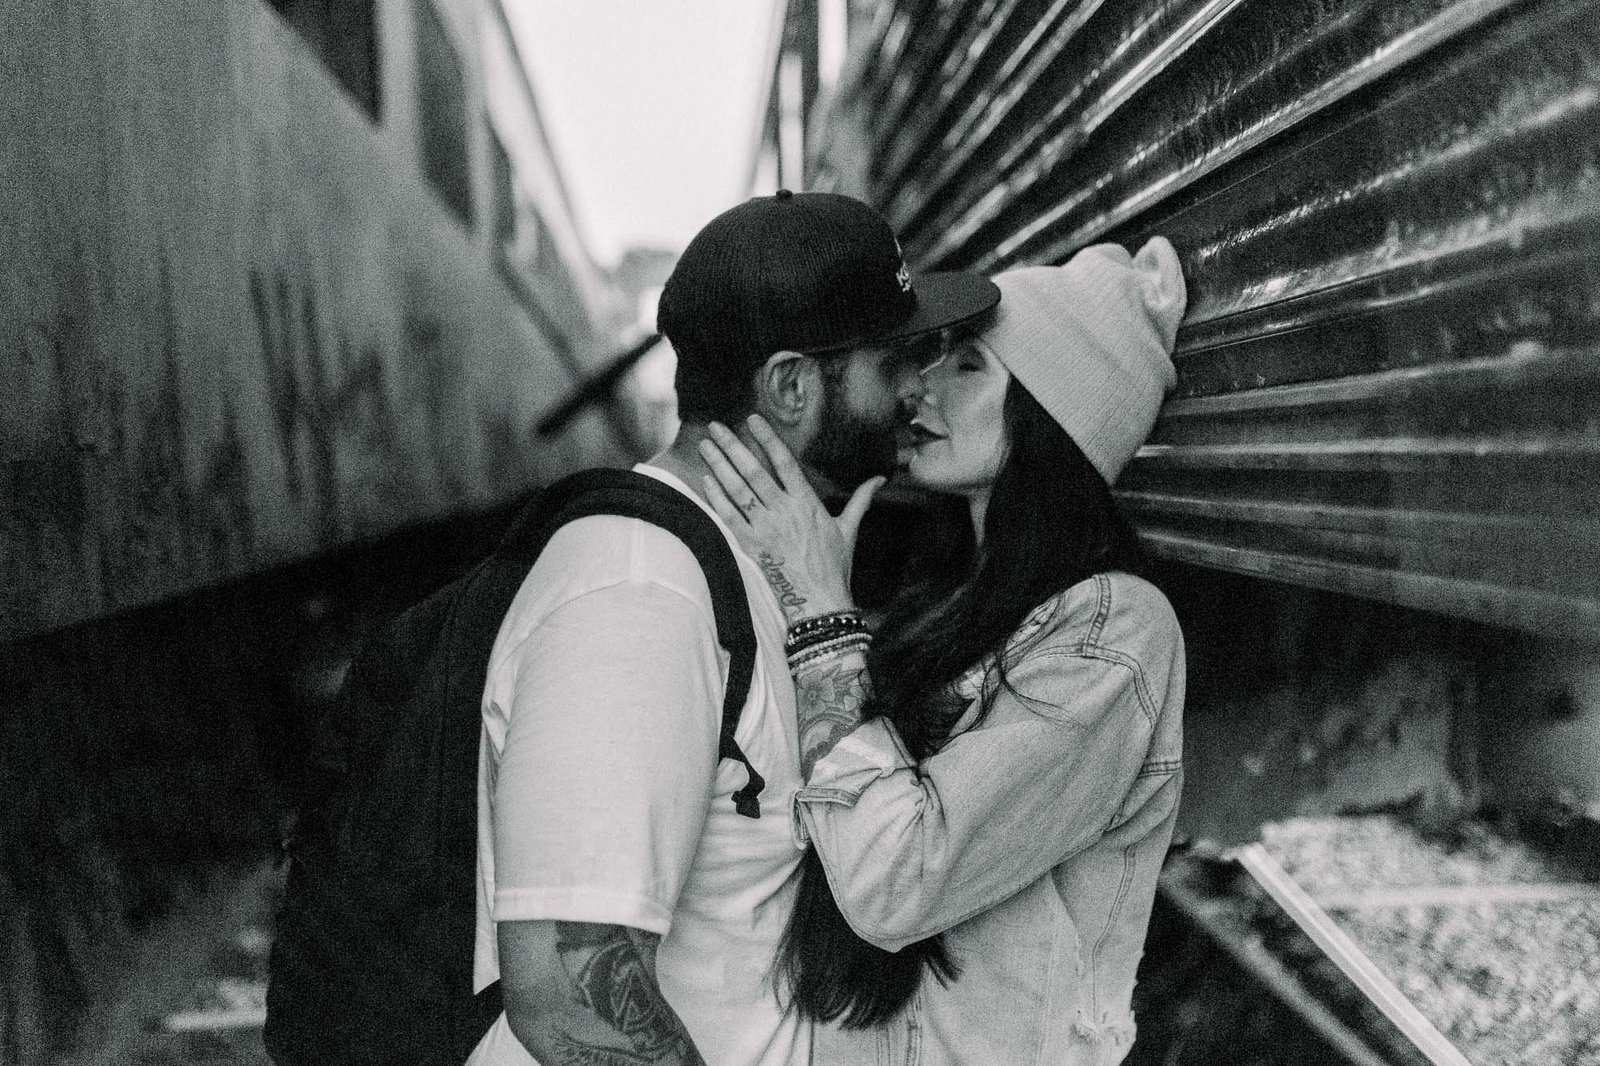 Couple kissing in between train cars captured by Staci Addison Photography